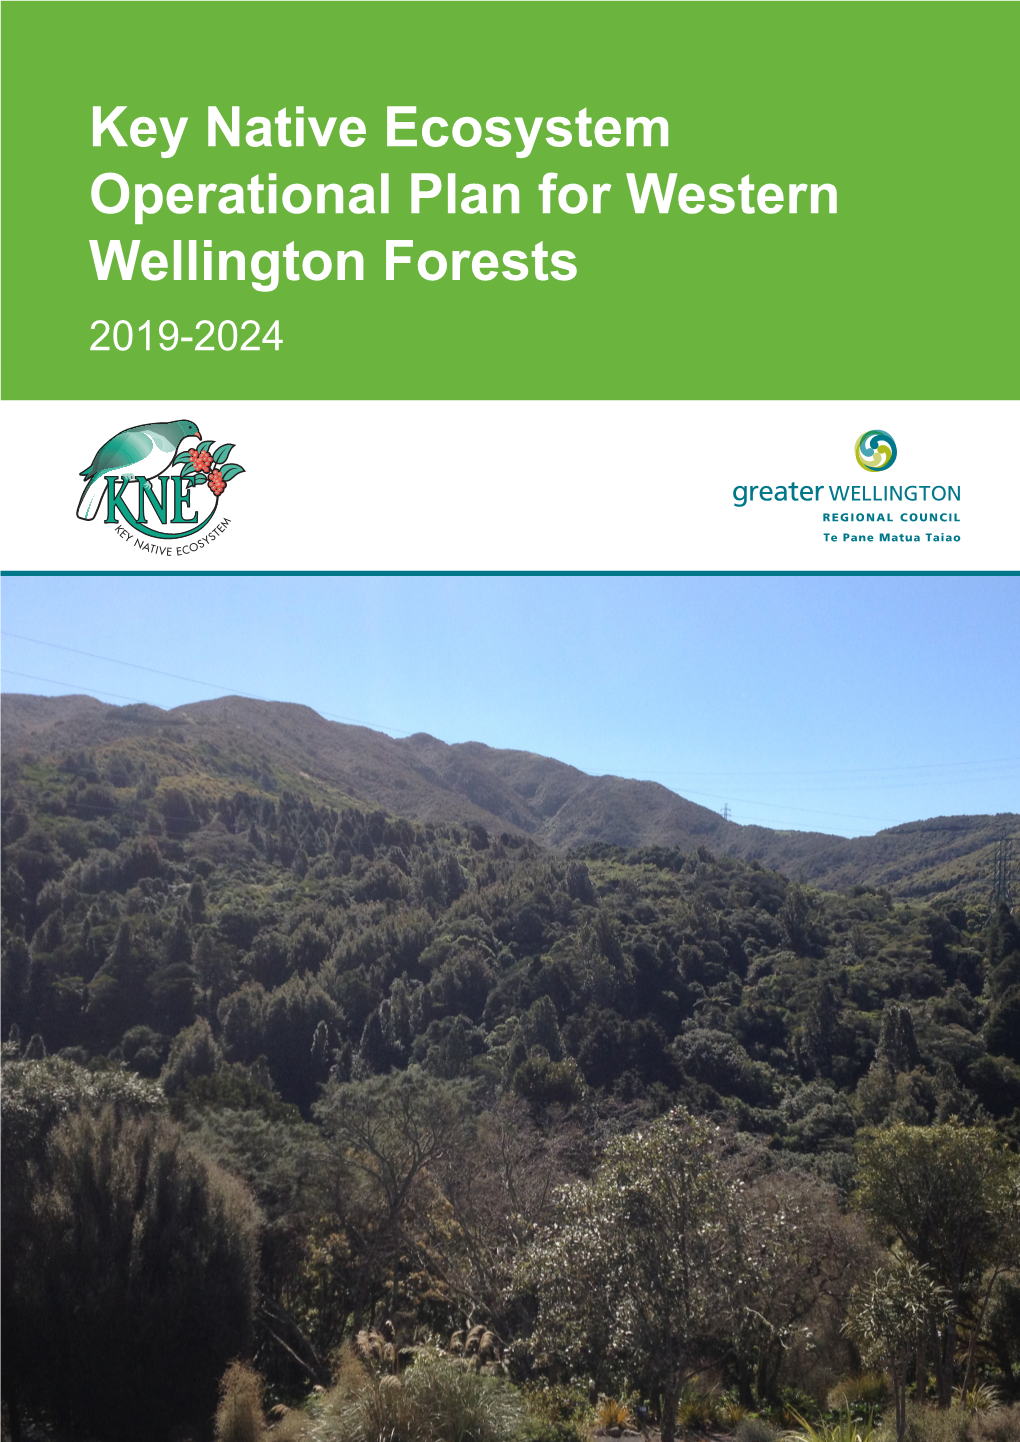 Key Native Ecosystem Operational Plan for Western Wellington Forests 2019-2024